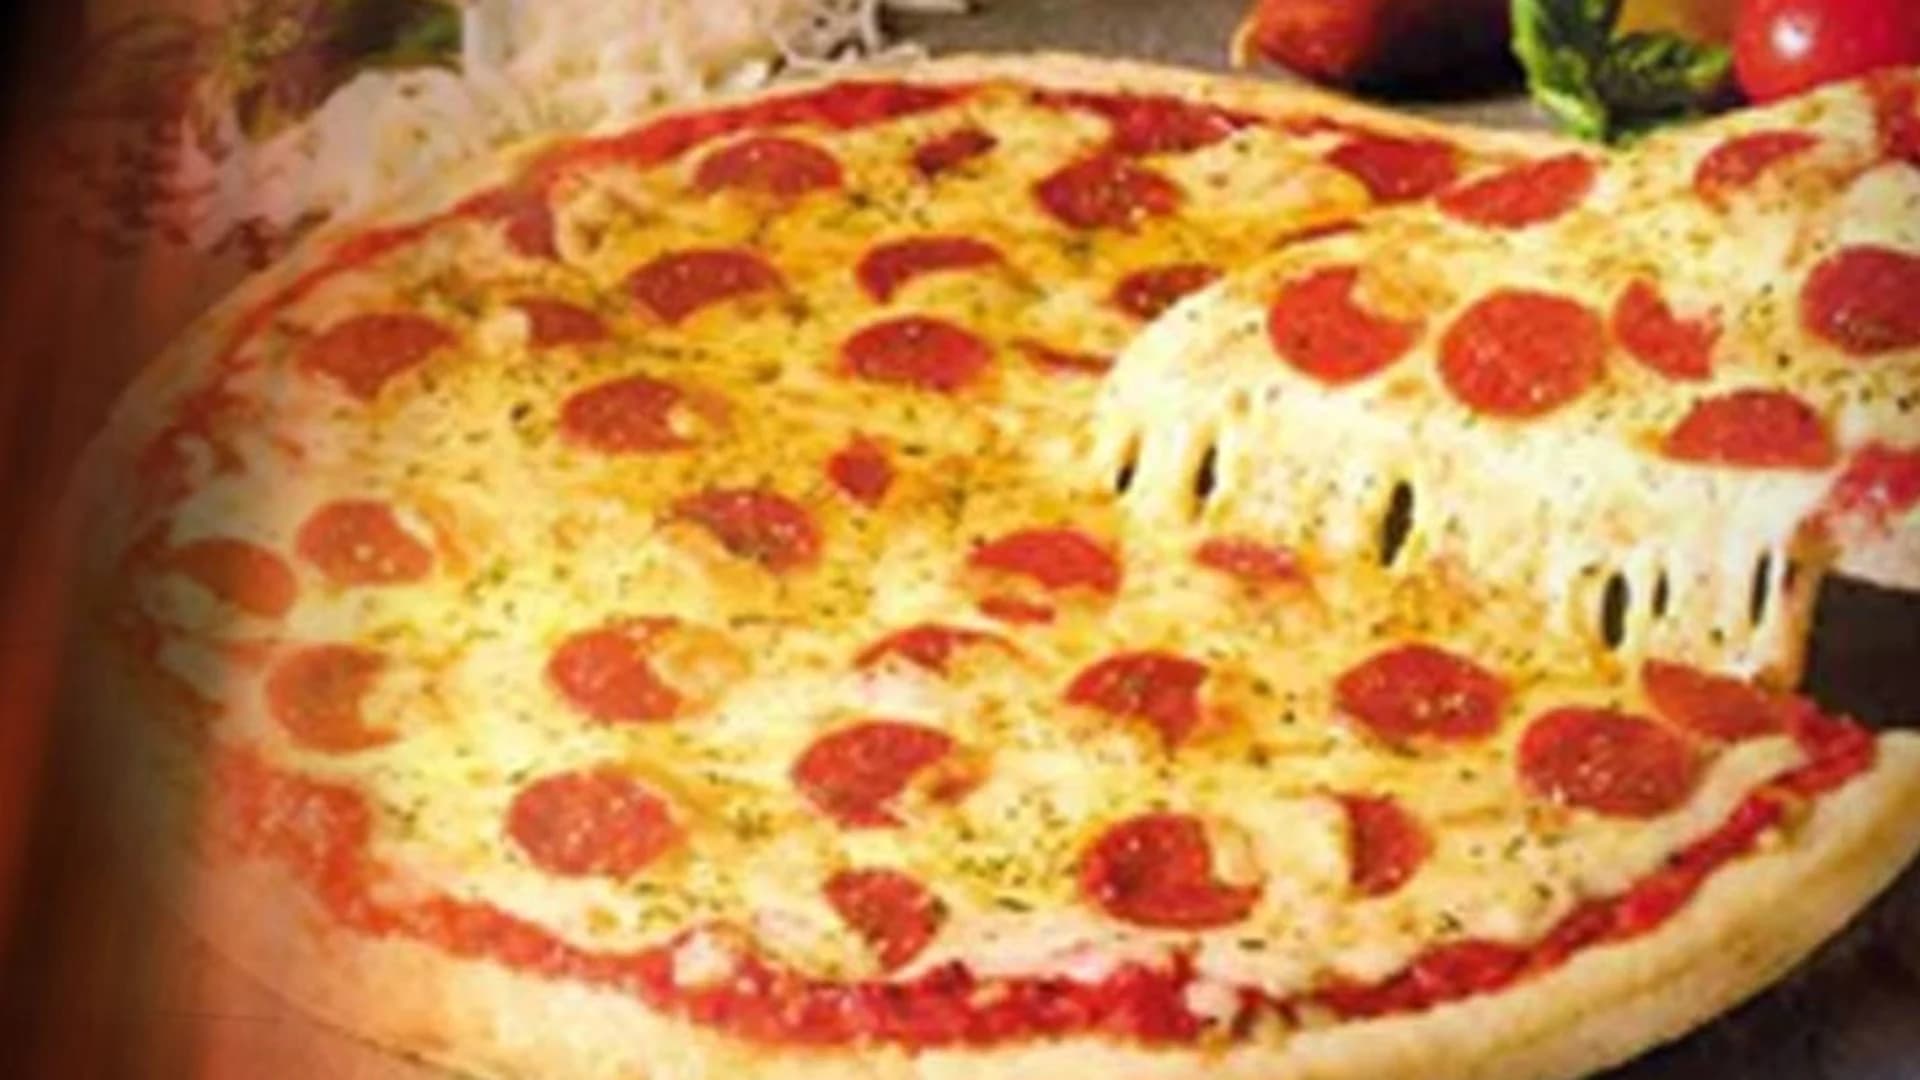 Police: Woman attacked man and then stole his pizza